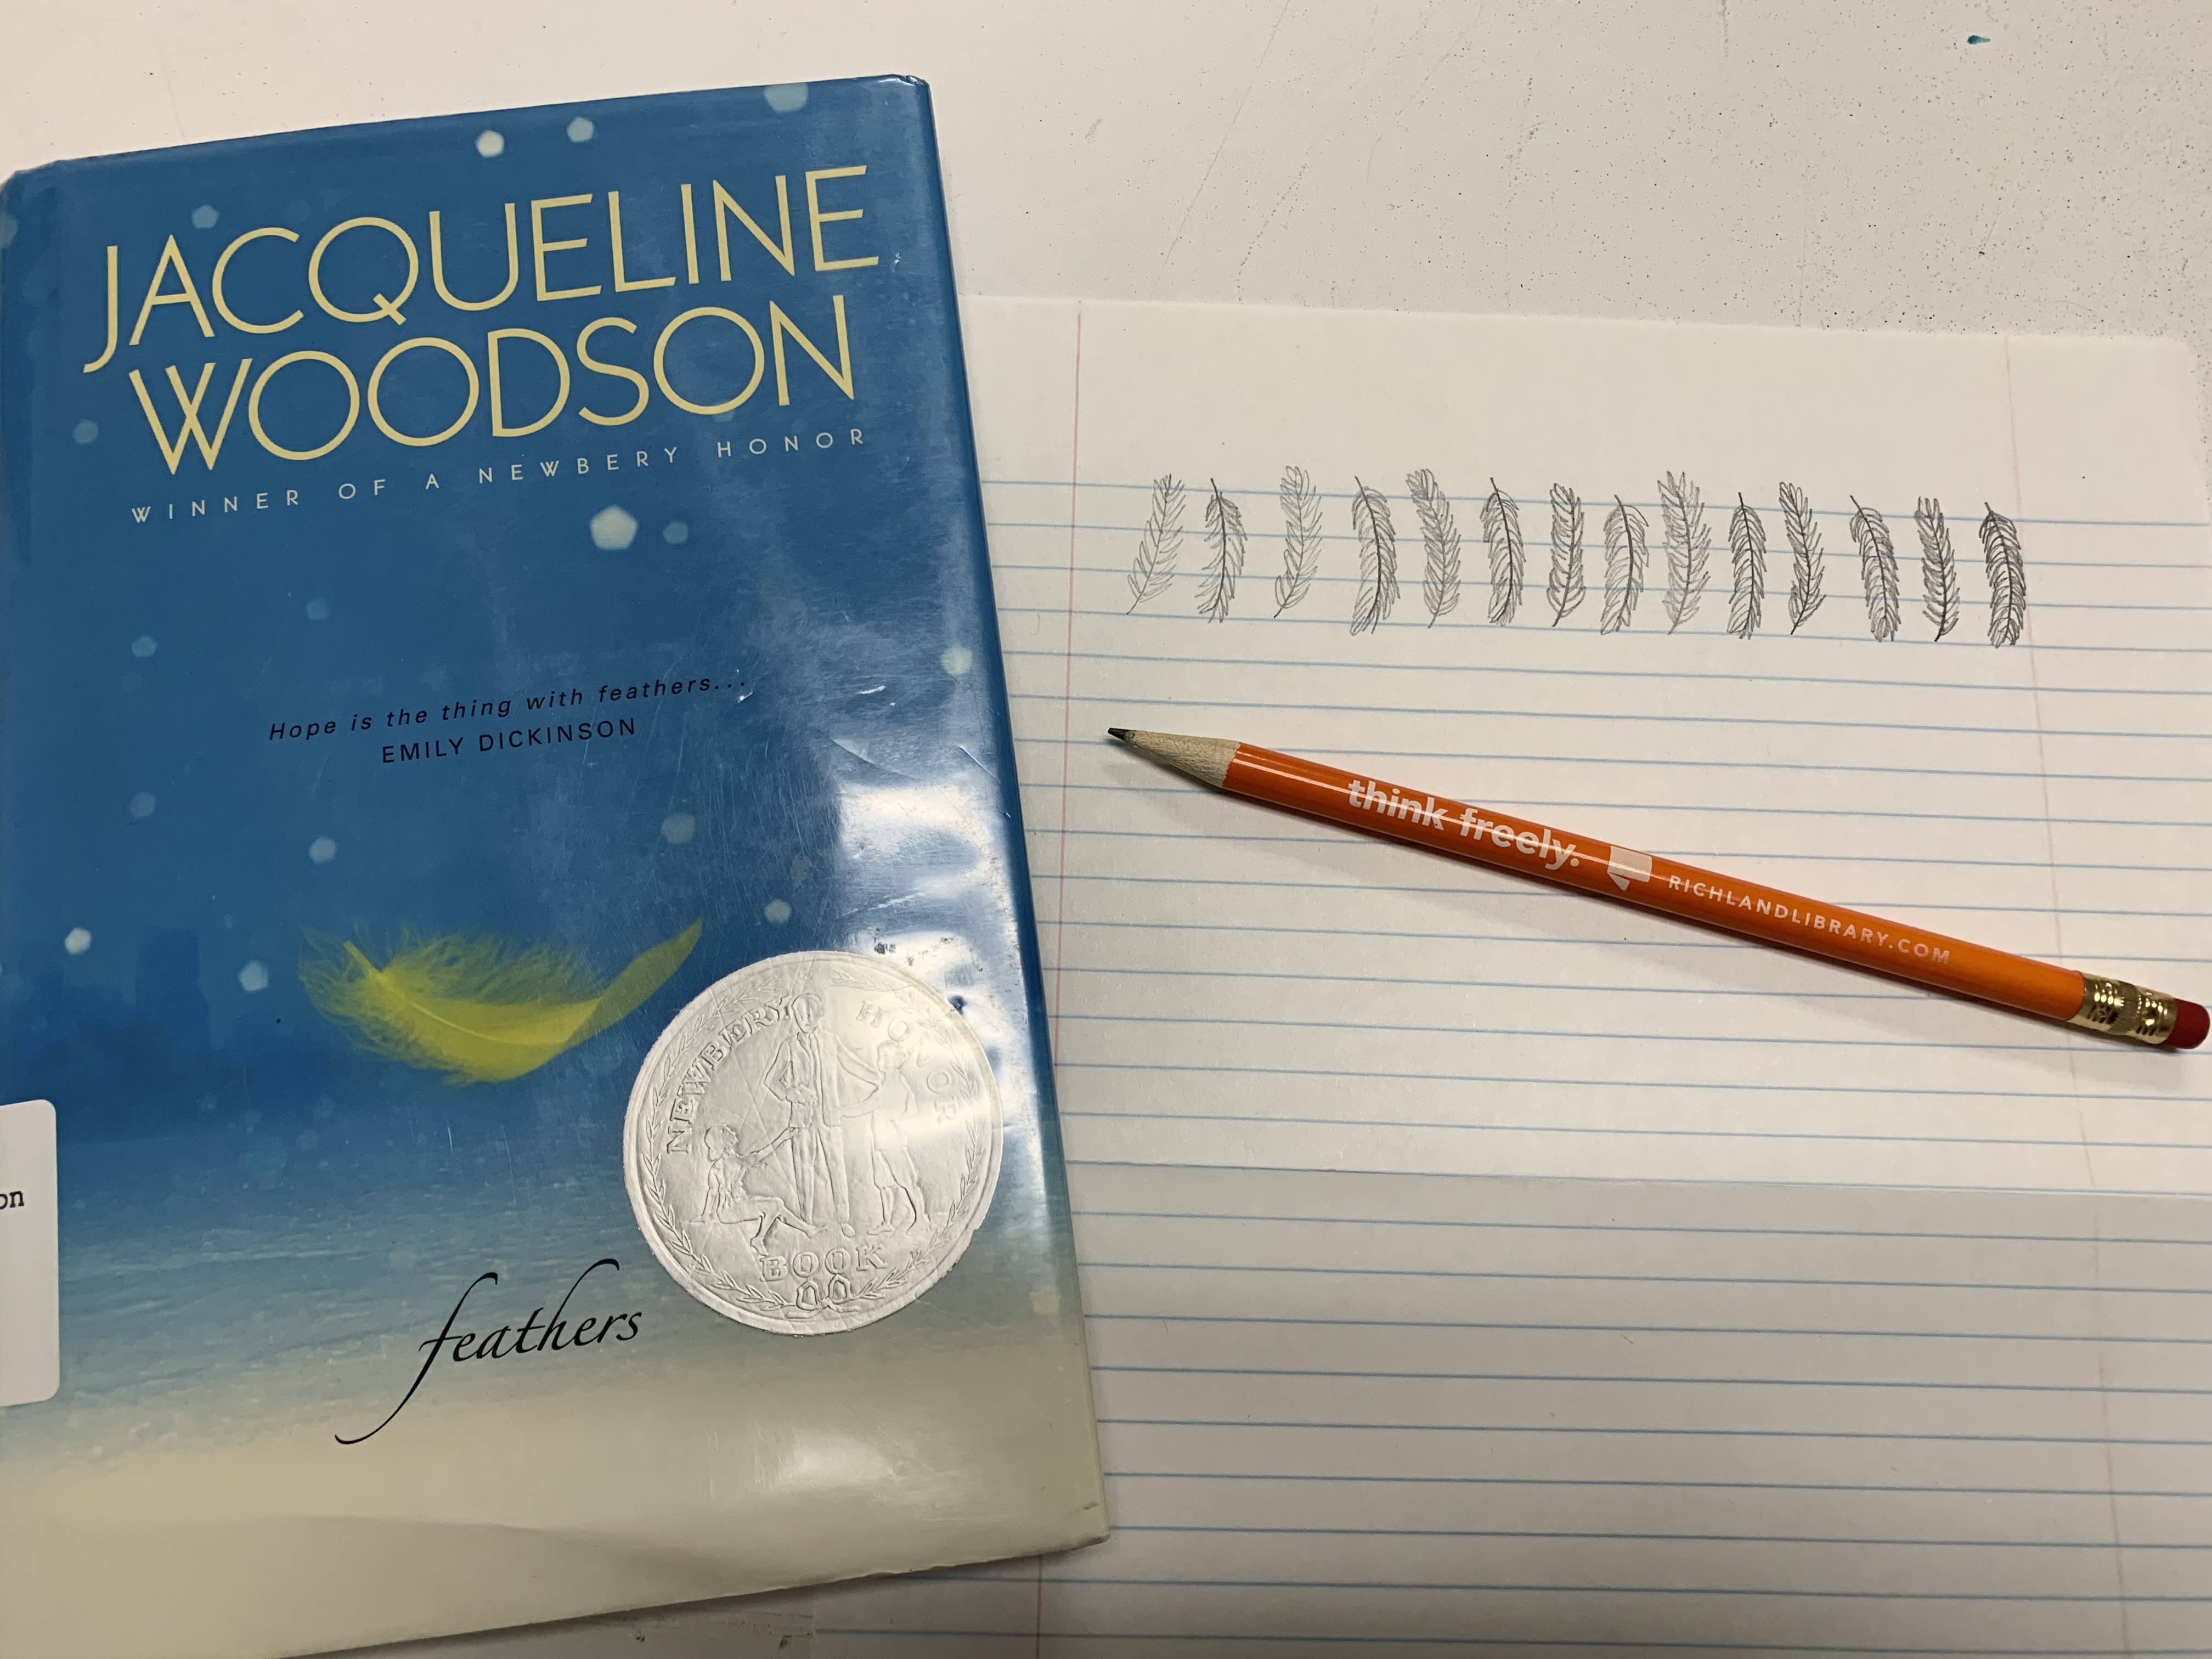 Photo of the book Feathers, by Jaqueline Woodson, next to lined paper with doodled feathers